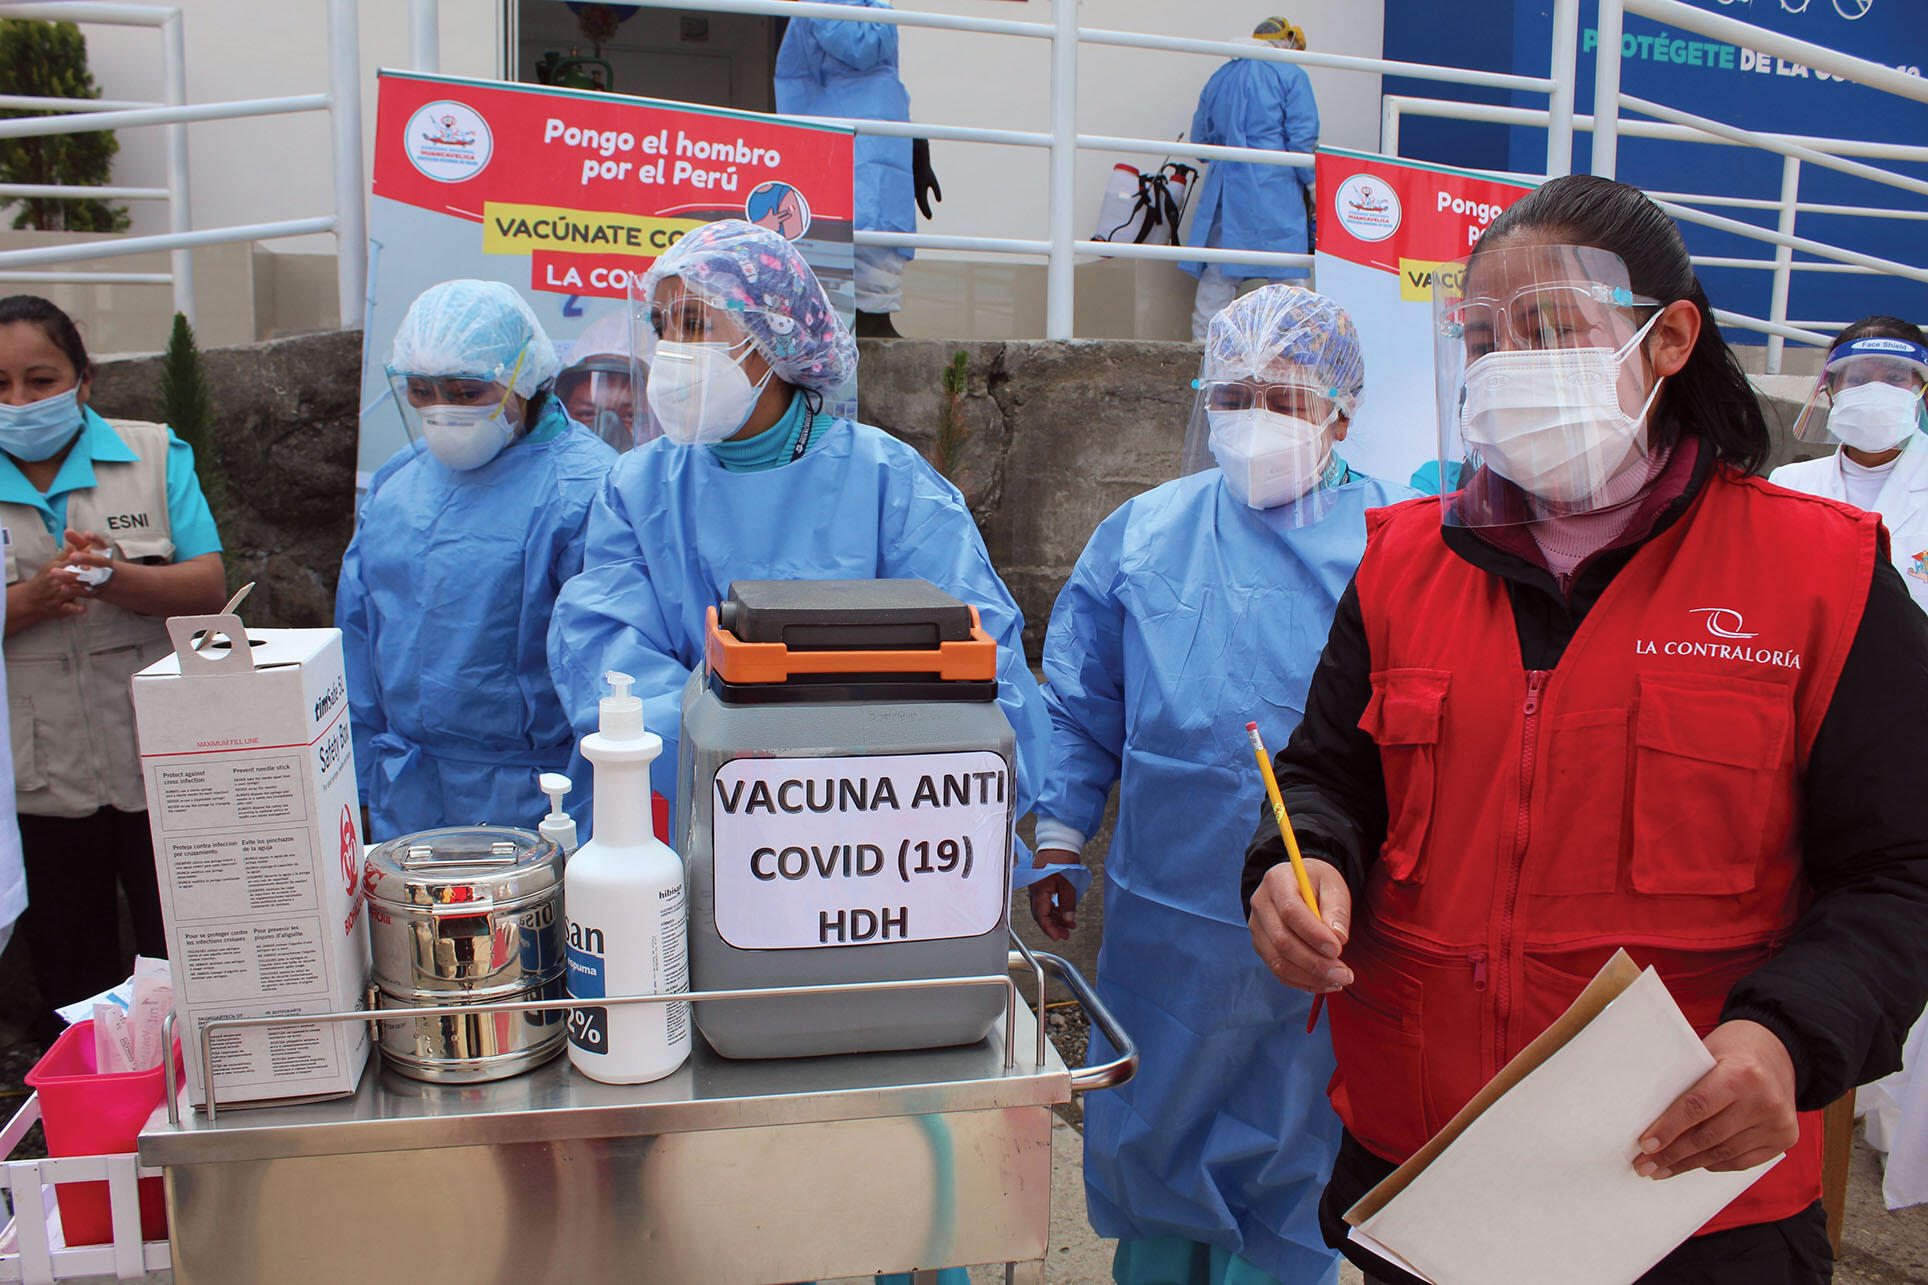 Healthcare workers in protective gear begin vaccine distribution among their colleagues in Huancavelica, Peru, February 2021. (Photo courtesy of Contraloría Perú.)